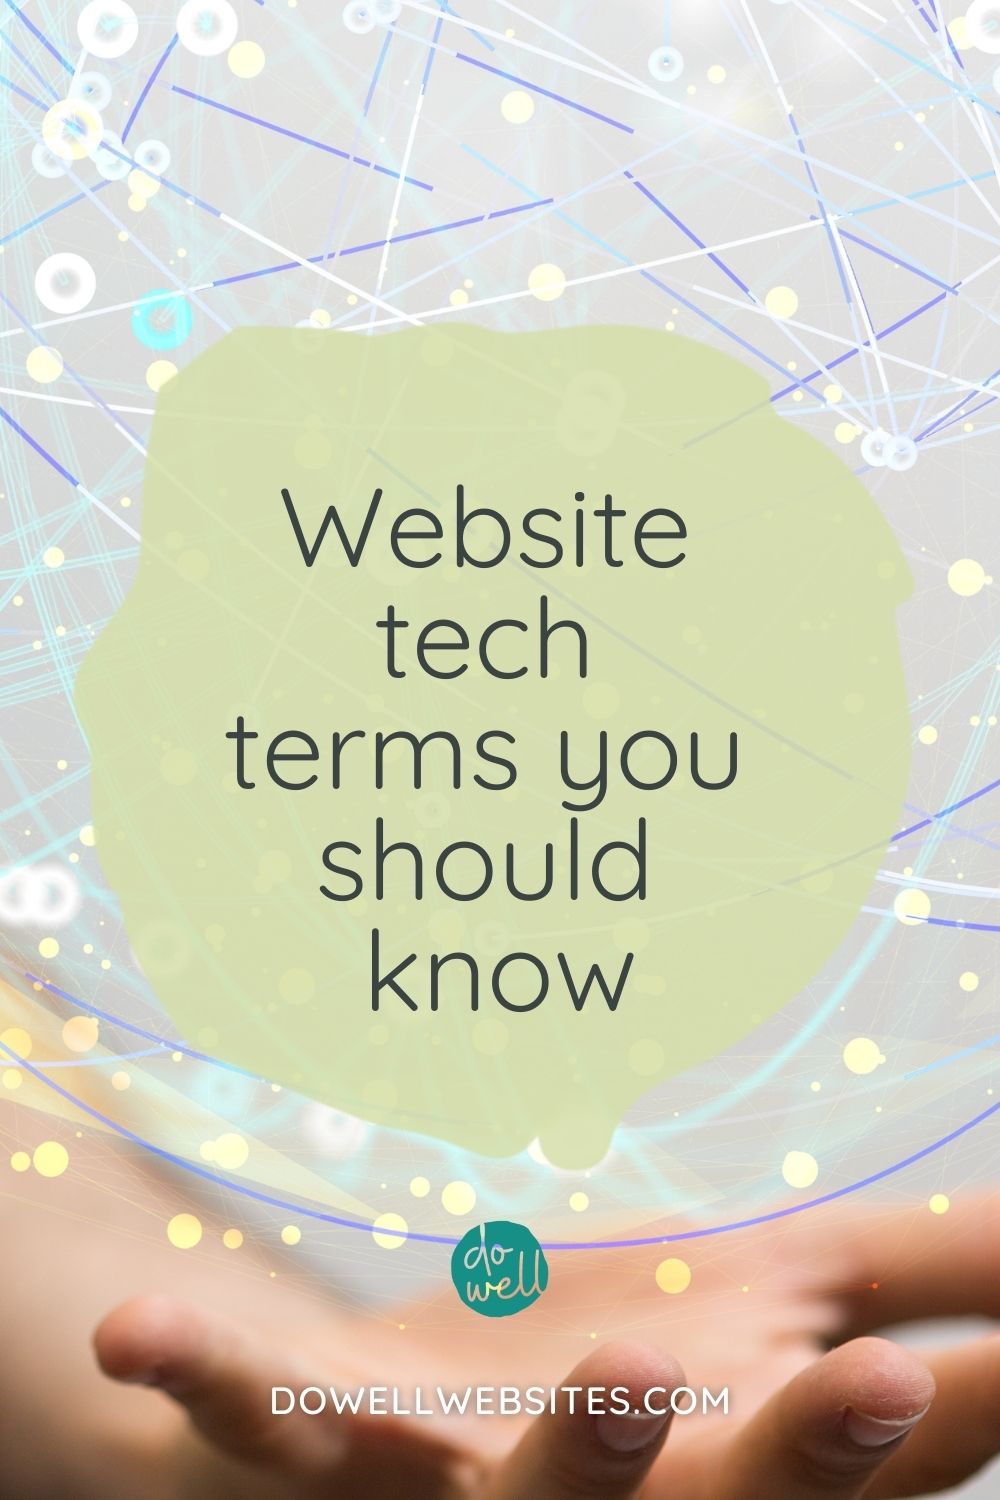 Website jargon can be really confusing and can completely intimidate a newbie. Learn the basic web tech terms that you need to know to get started.